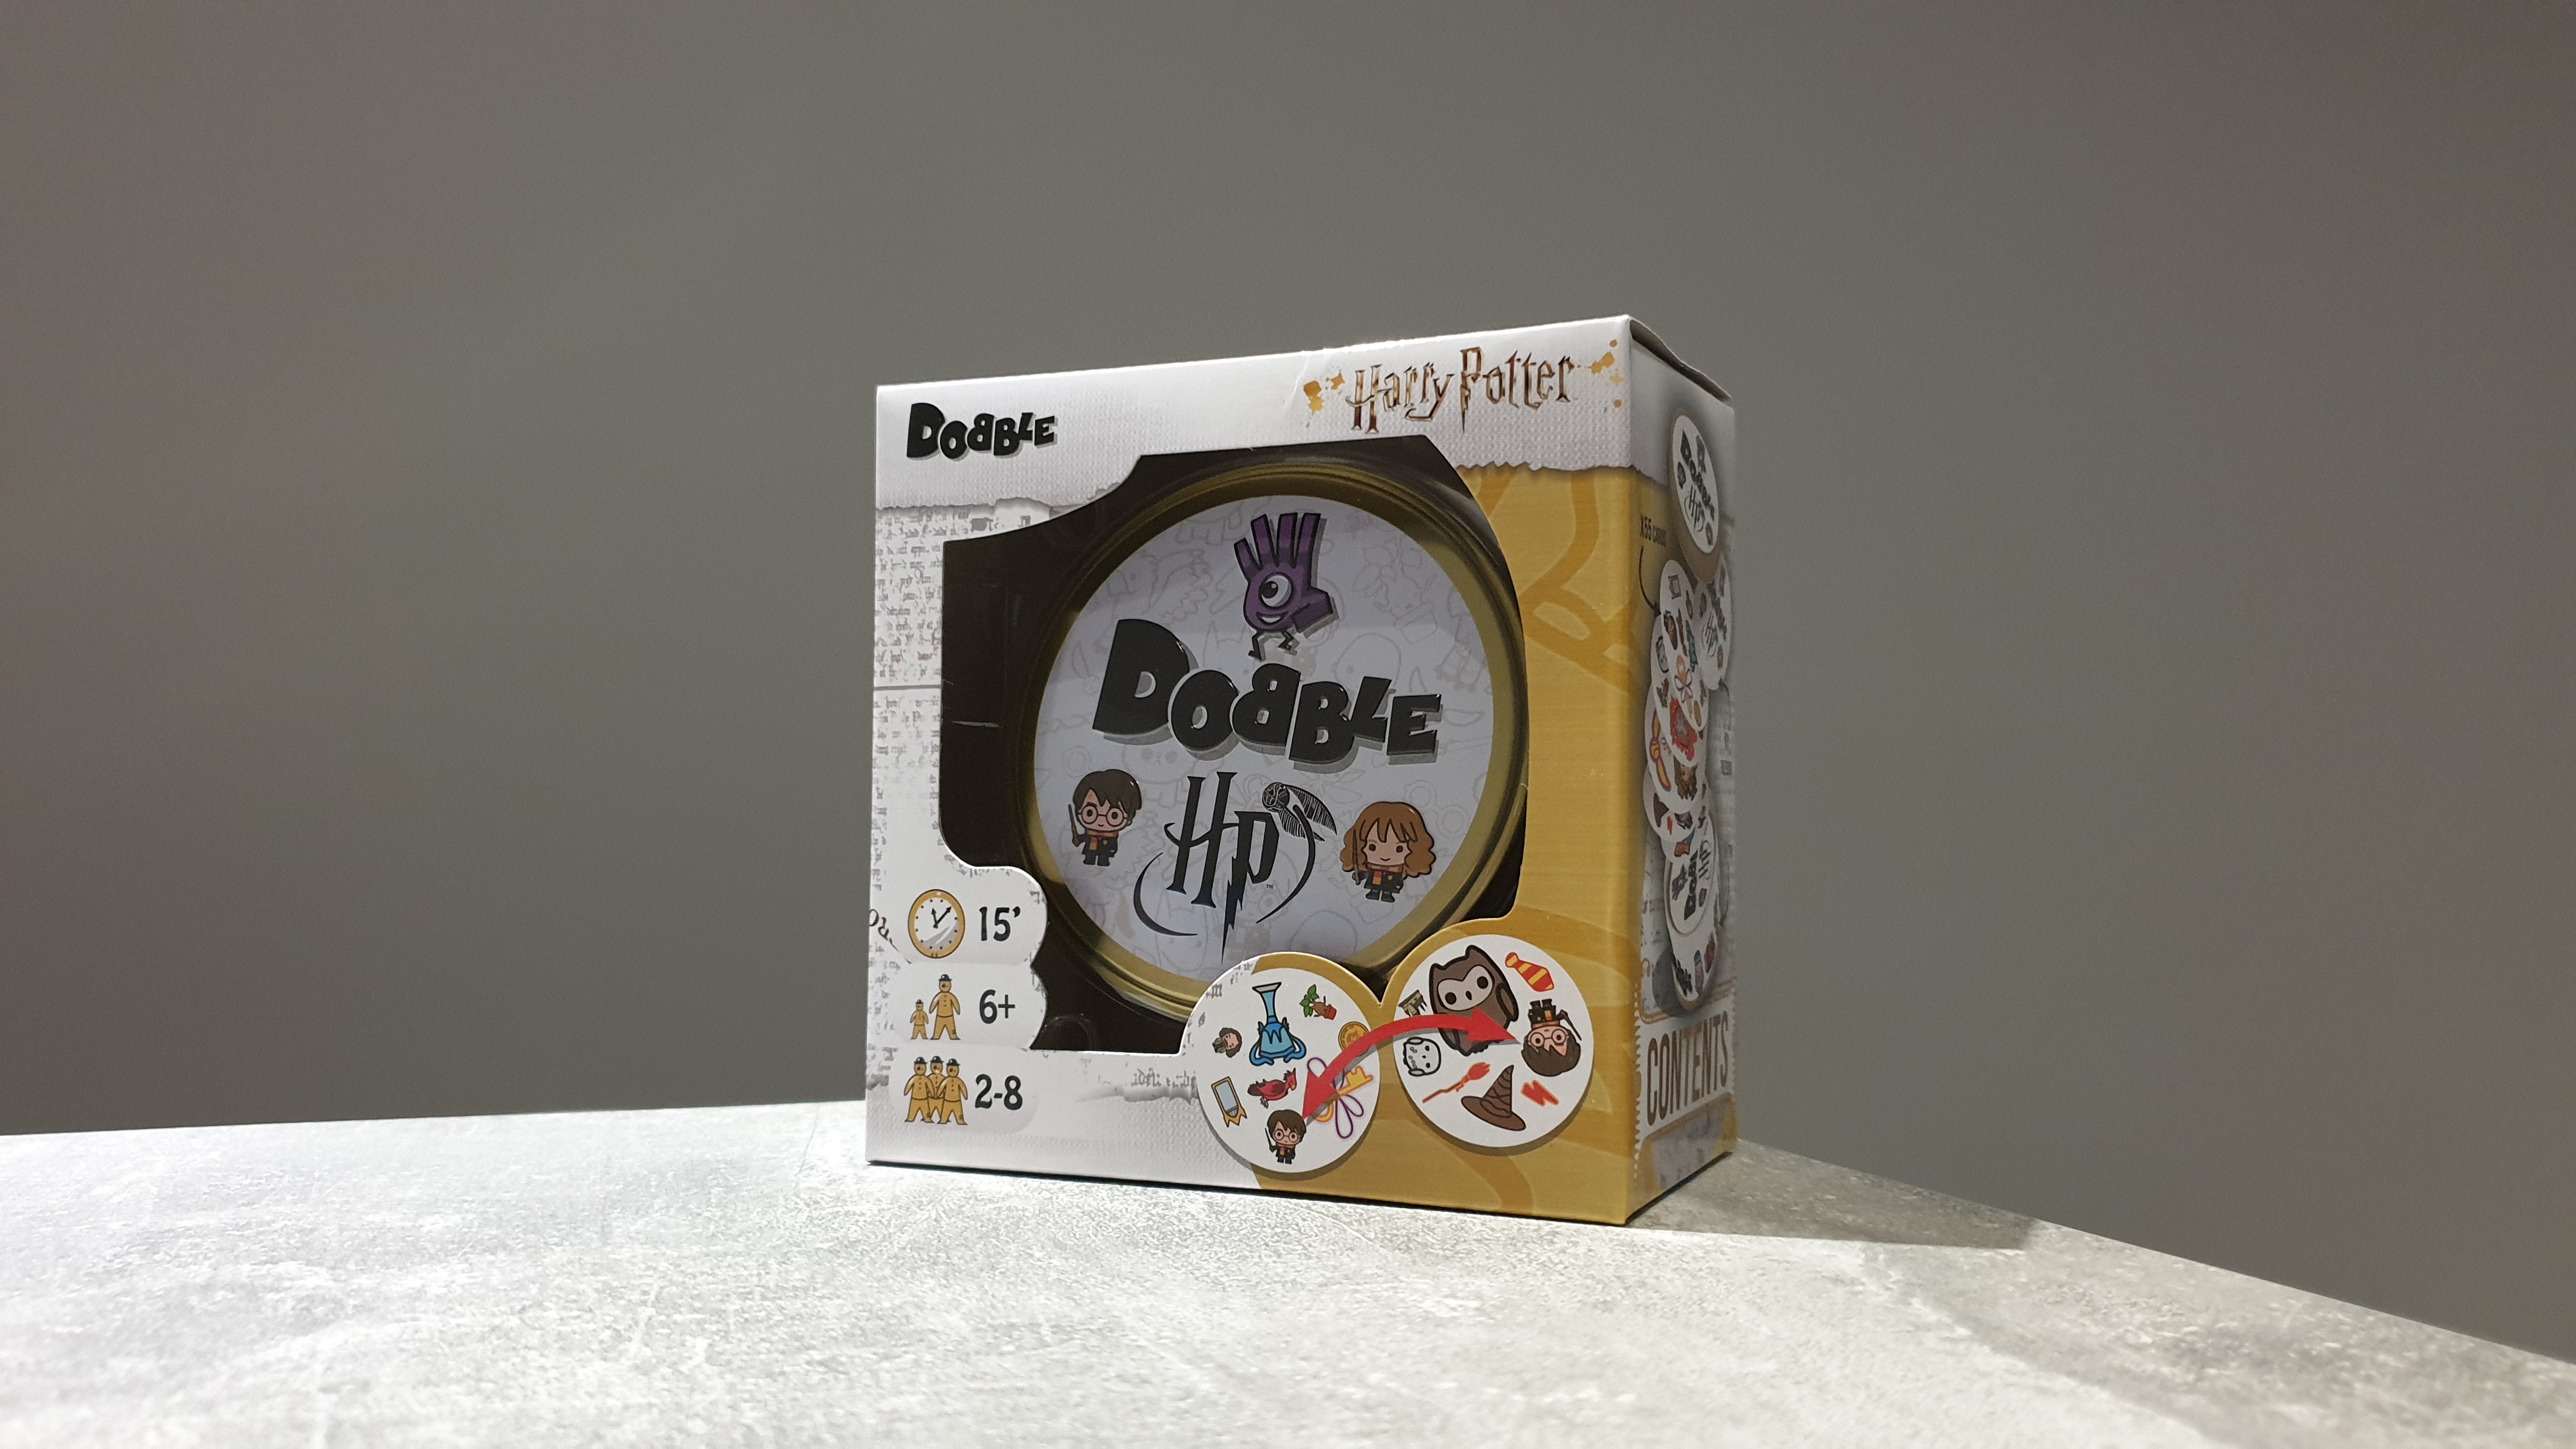 Harry Potter Dobble Review – Is It Magical?